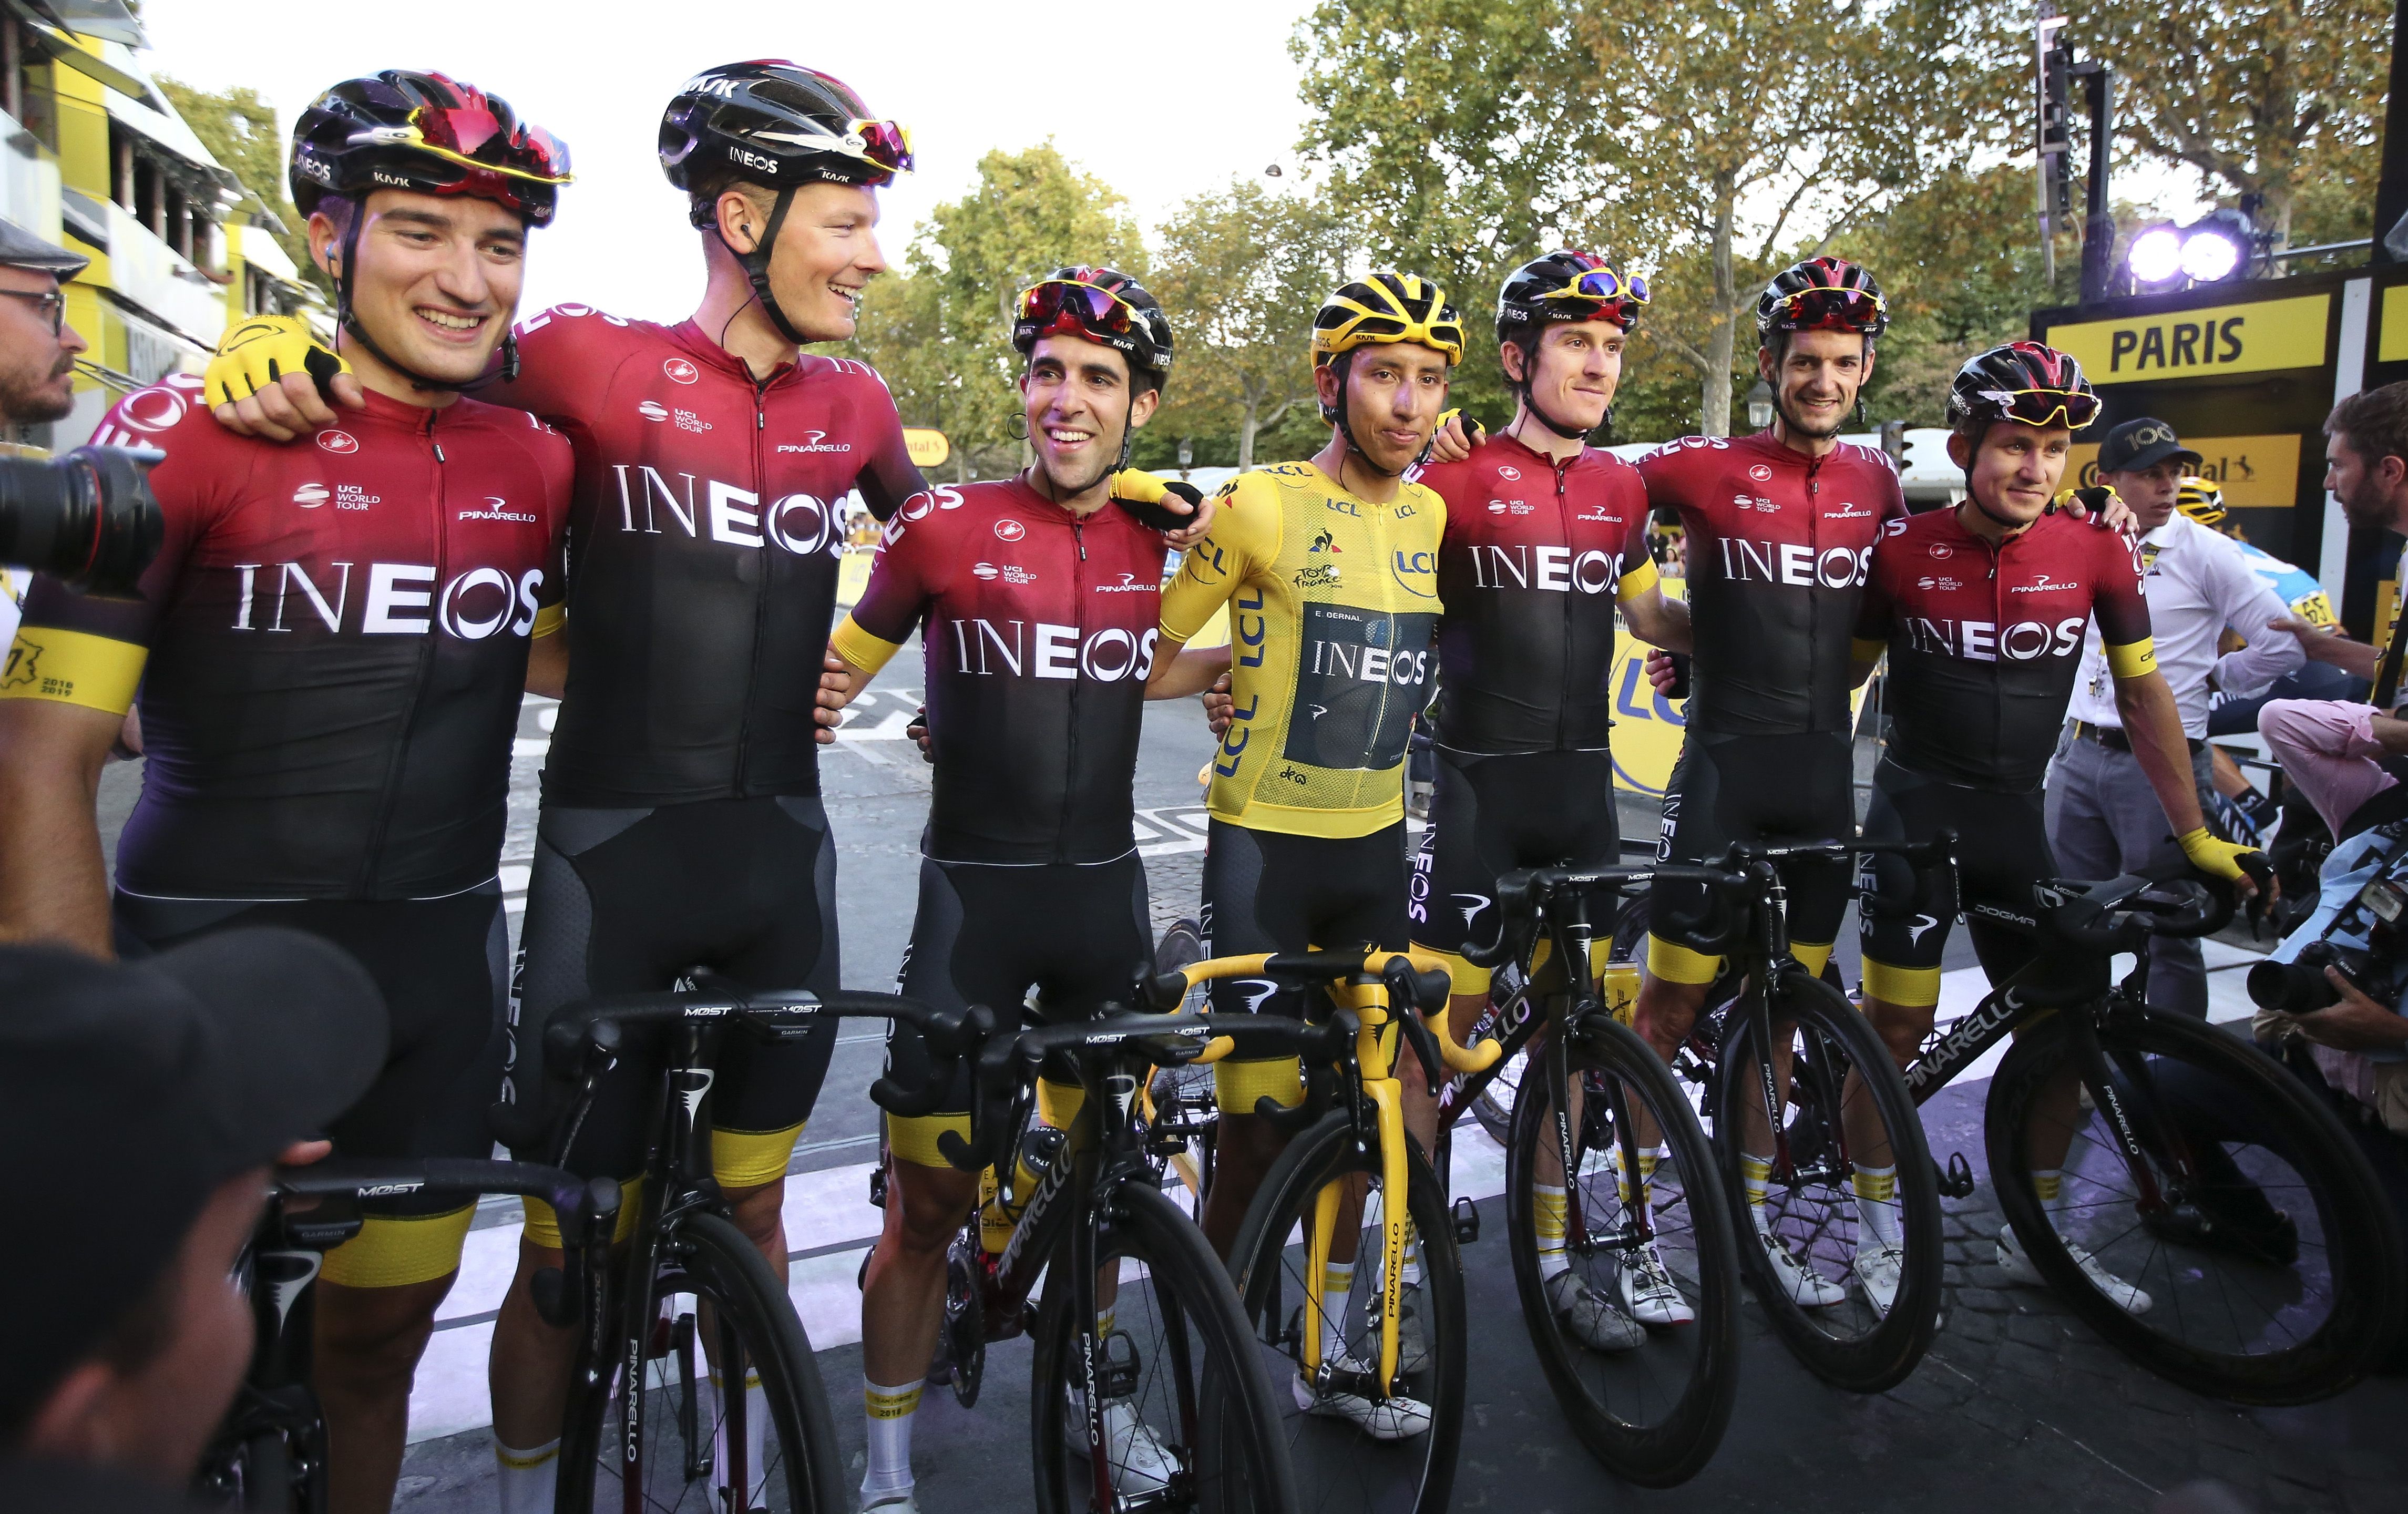 Ineos Cycling Team - Unbeatable After 7 